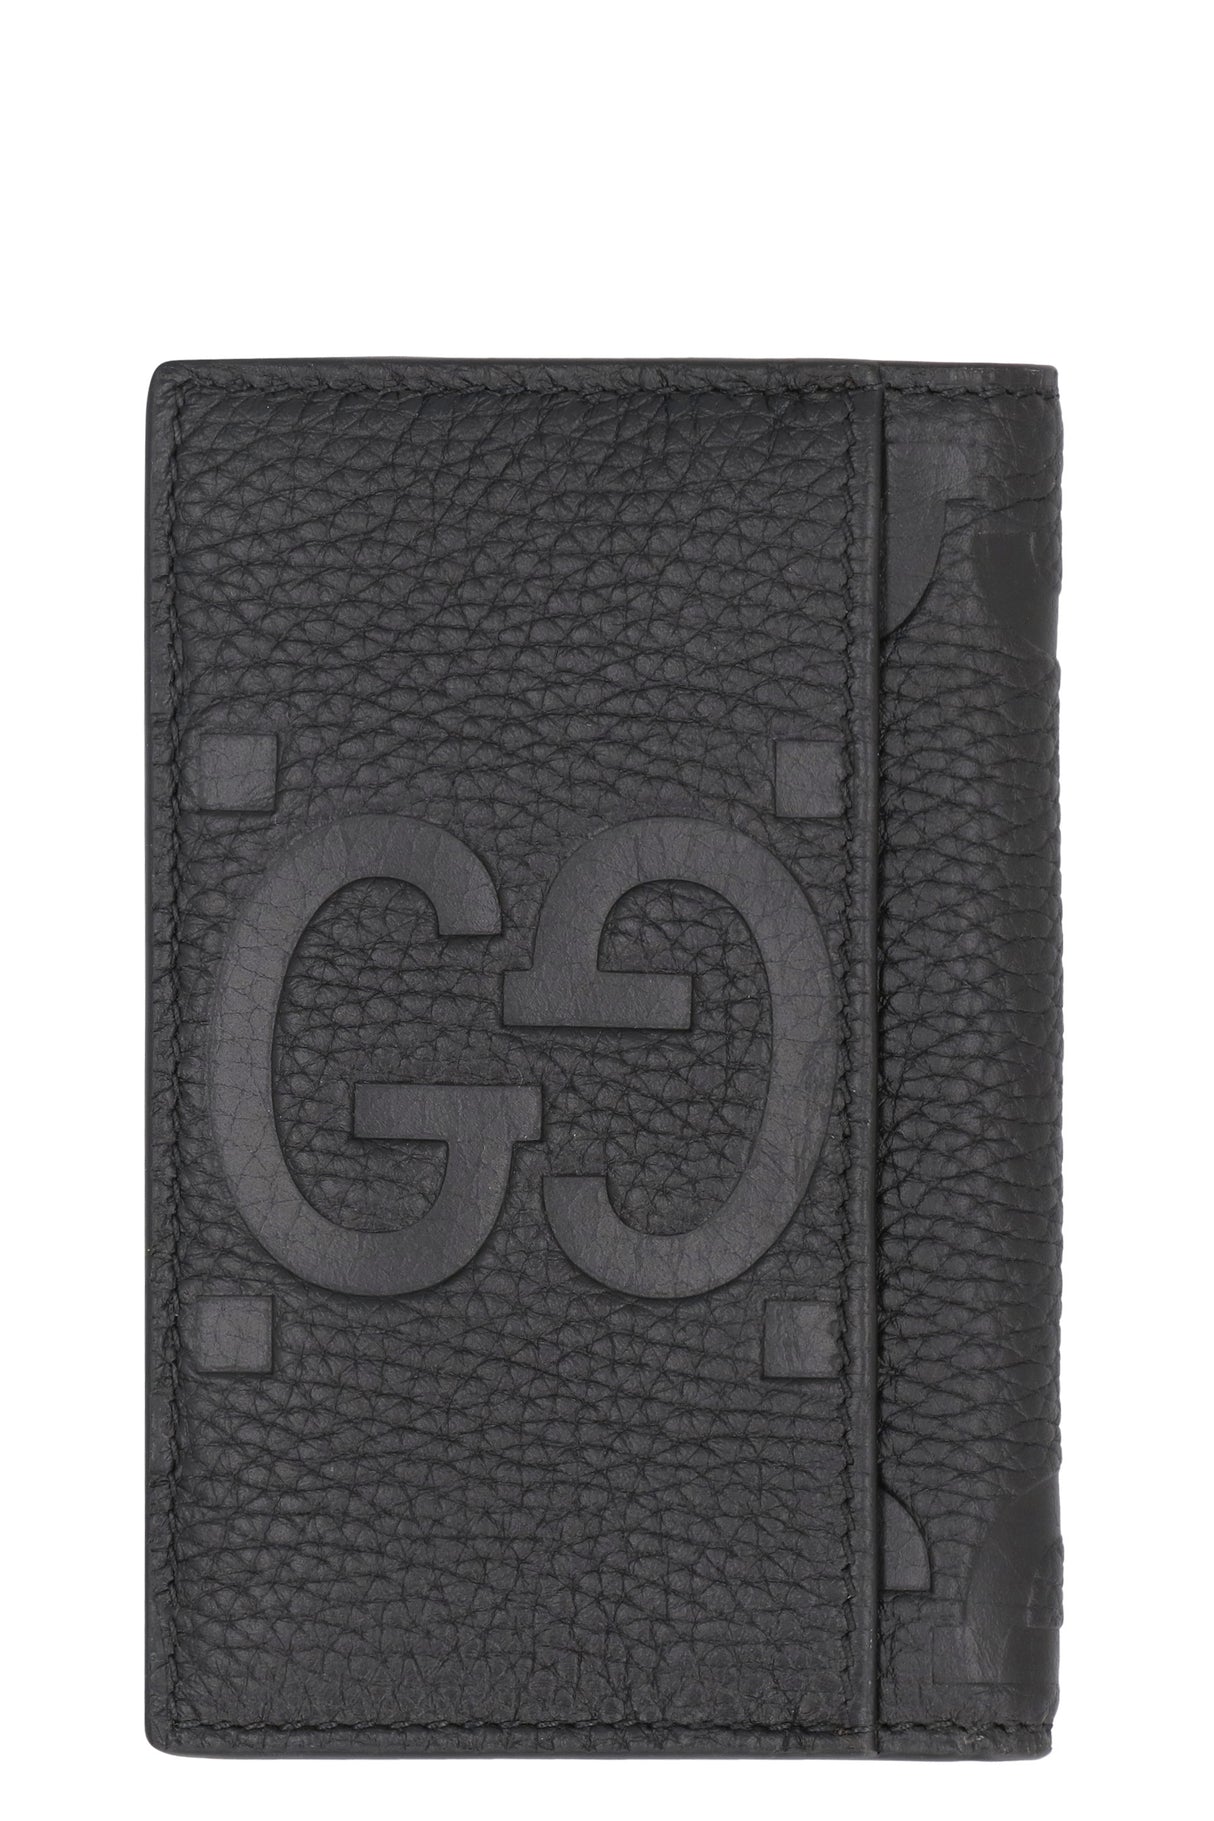 GUCCI Jumbo Black Leather Card Holder for Men - FW23 Collection